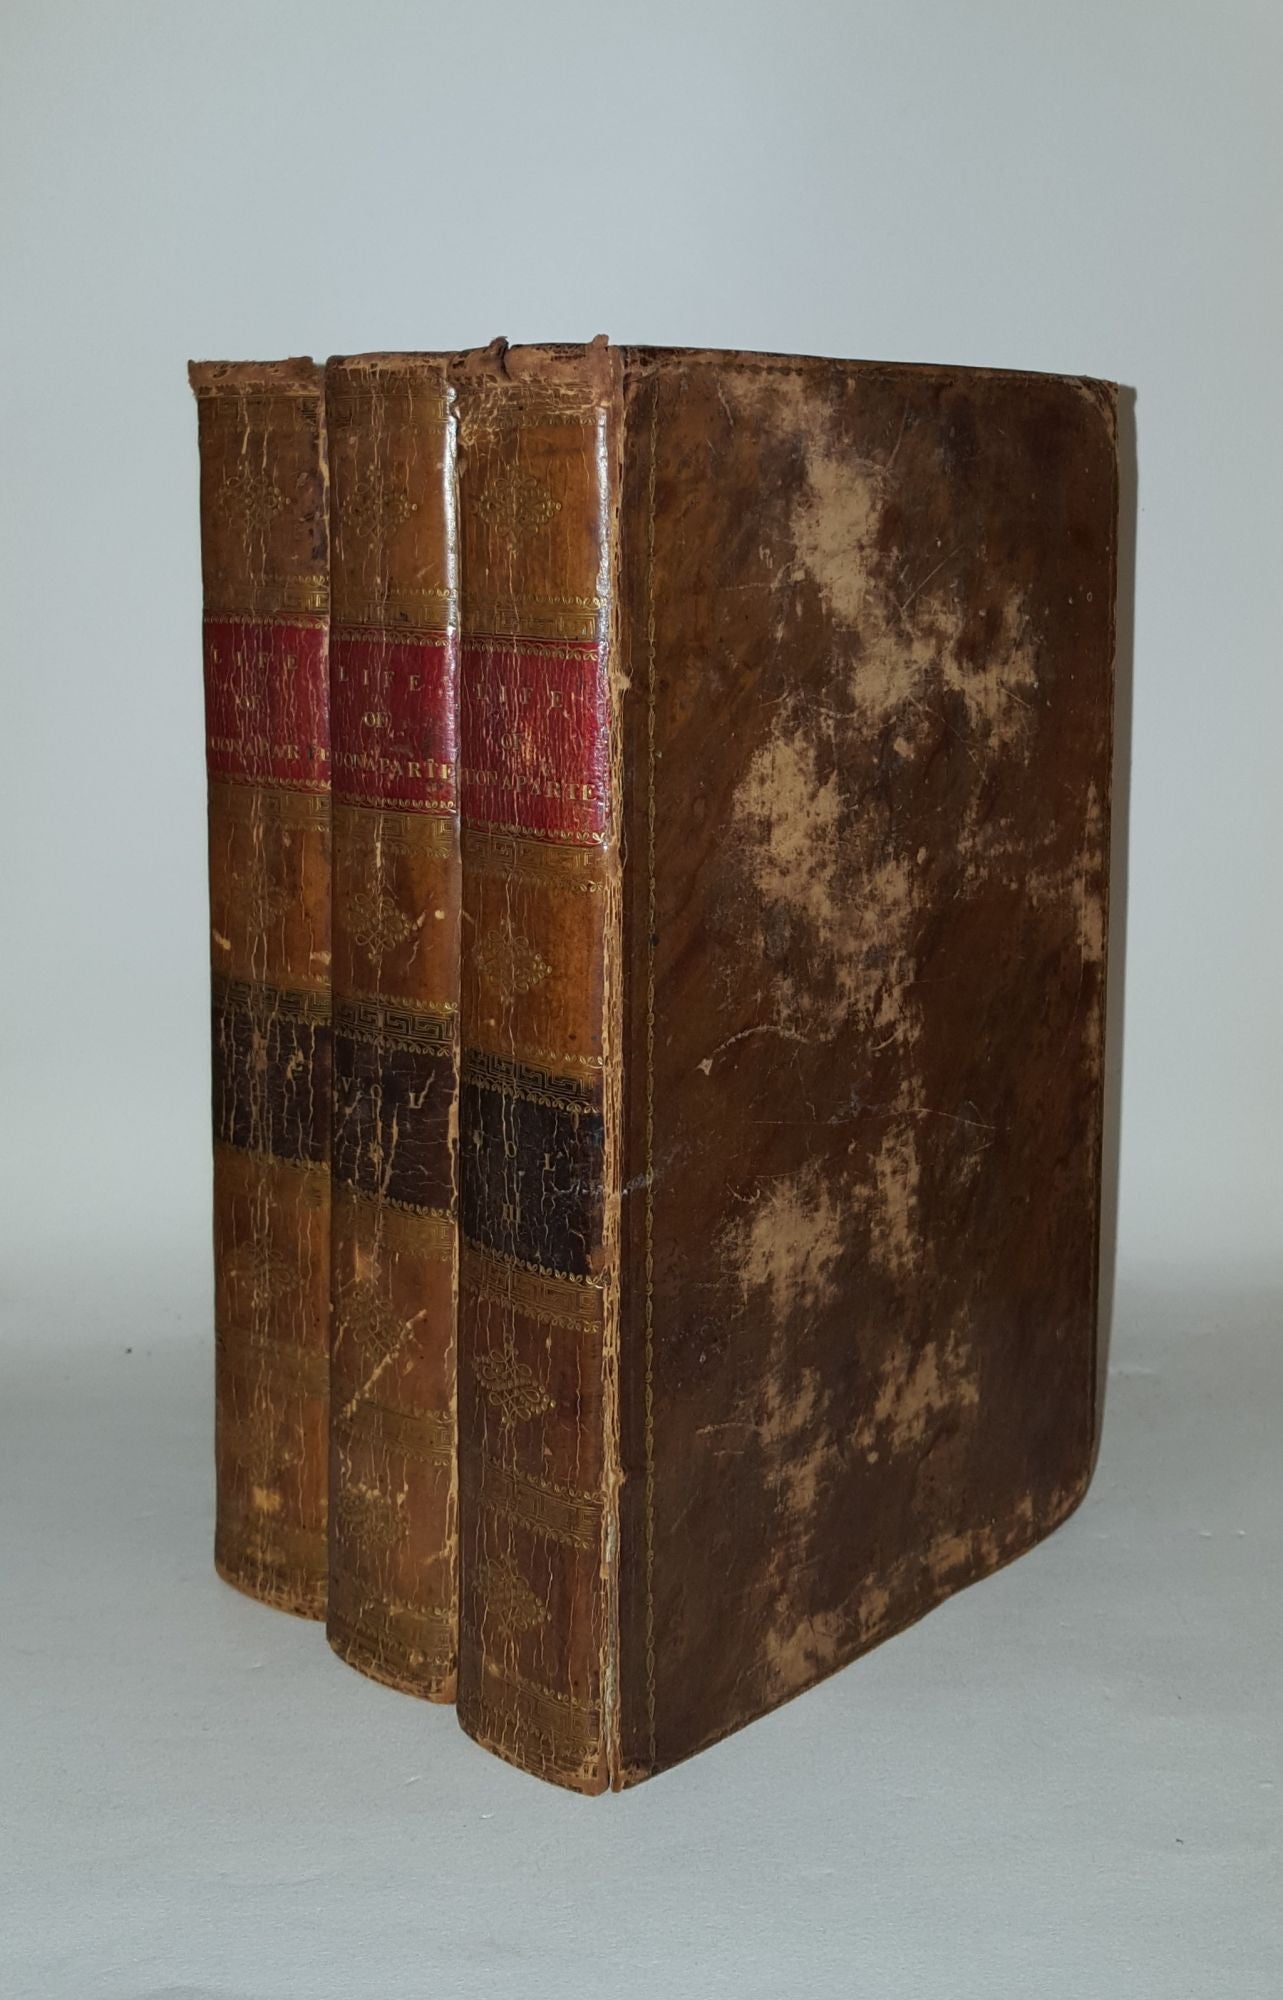 HEWESTON W. B. - History of Napoleon Bonaparte and Wars in Europe from the Revolution in France to the Termination of the Late Wars Including Anecdotes of the Most Celebrated Characters in Three Volumes